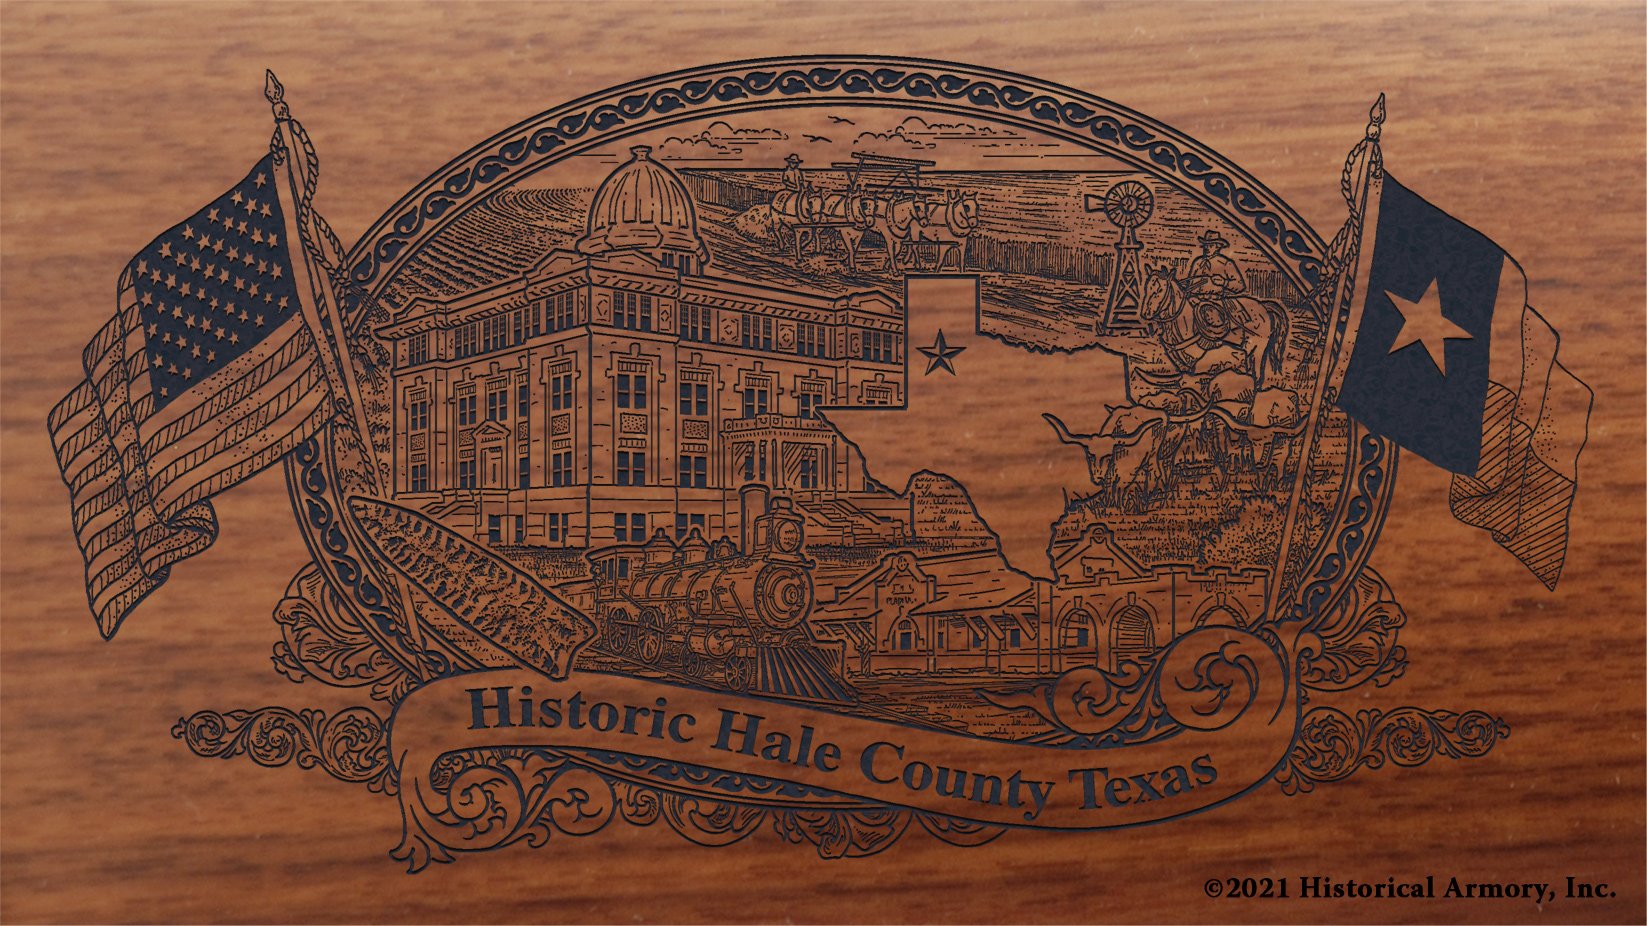 Engraved artwork | History of Hale County Texas | Historical Armory